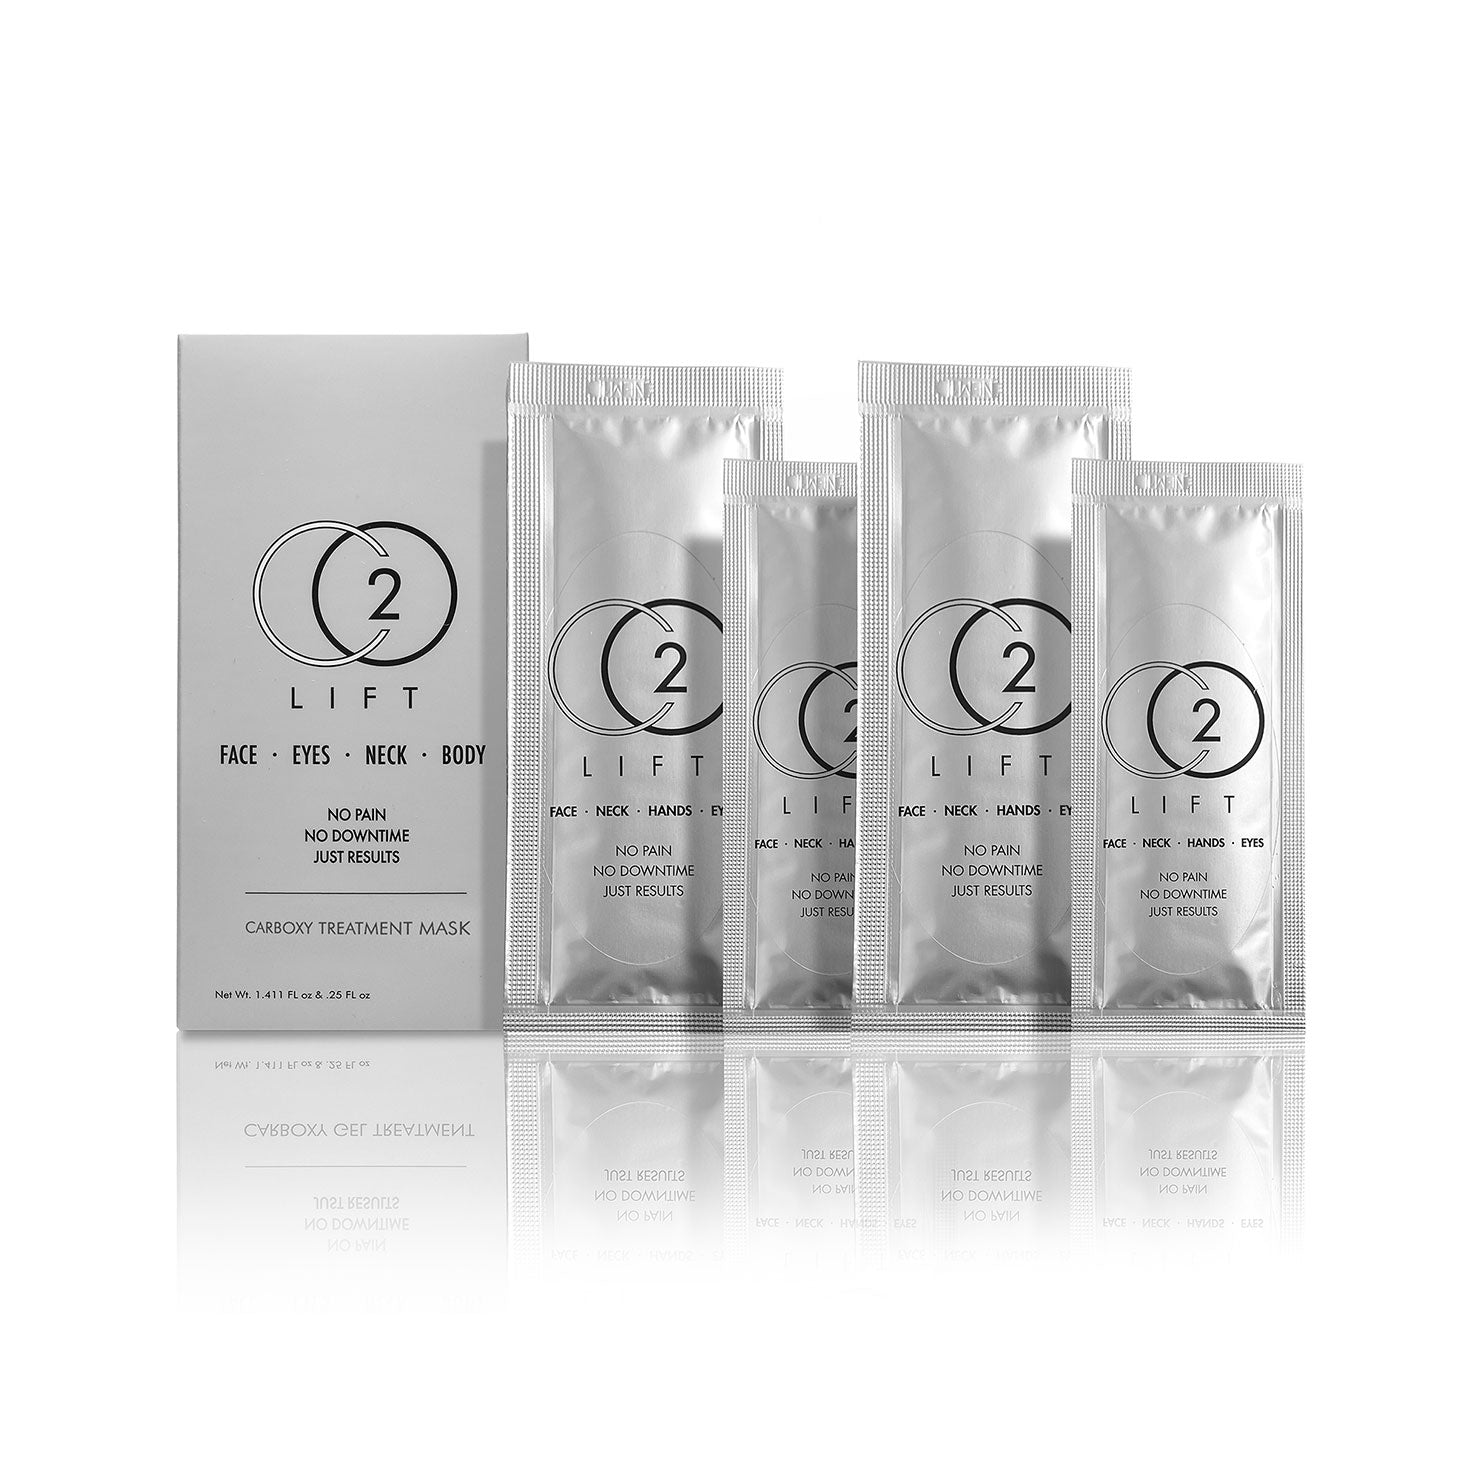 Carboxy Gel Treatment Double Pack